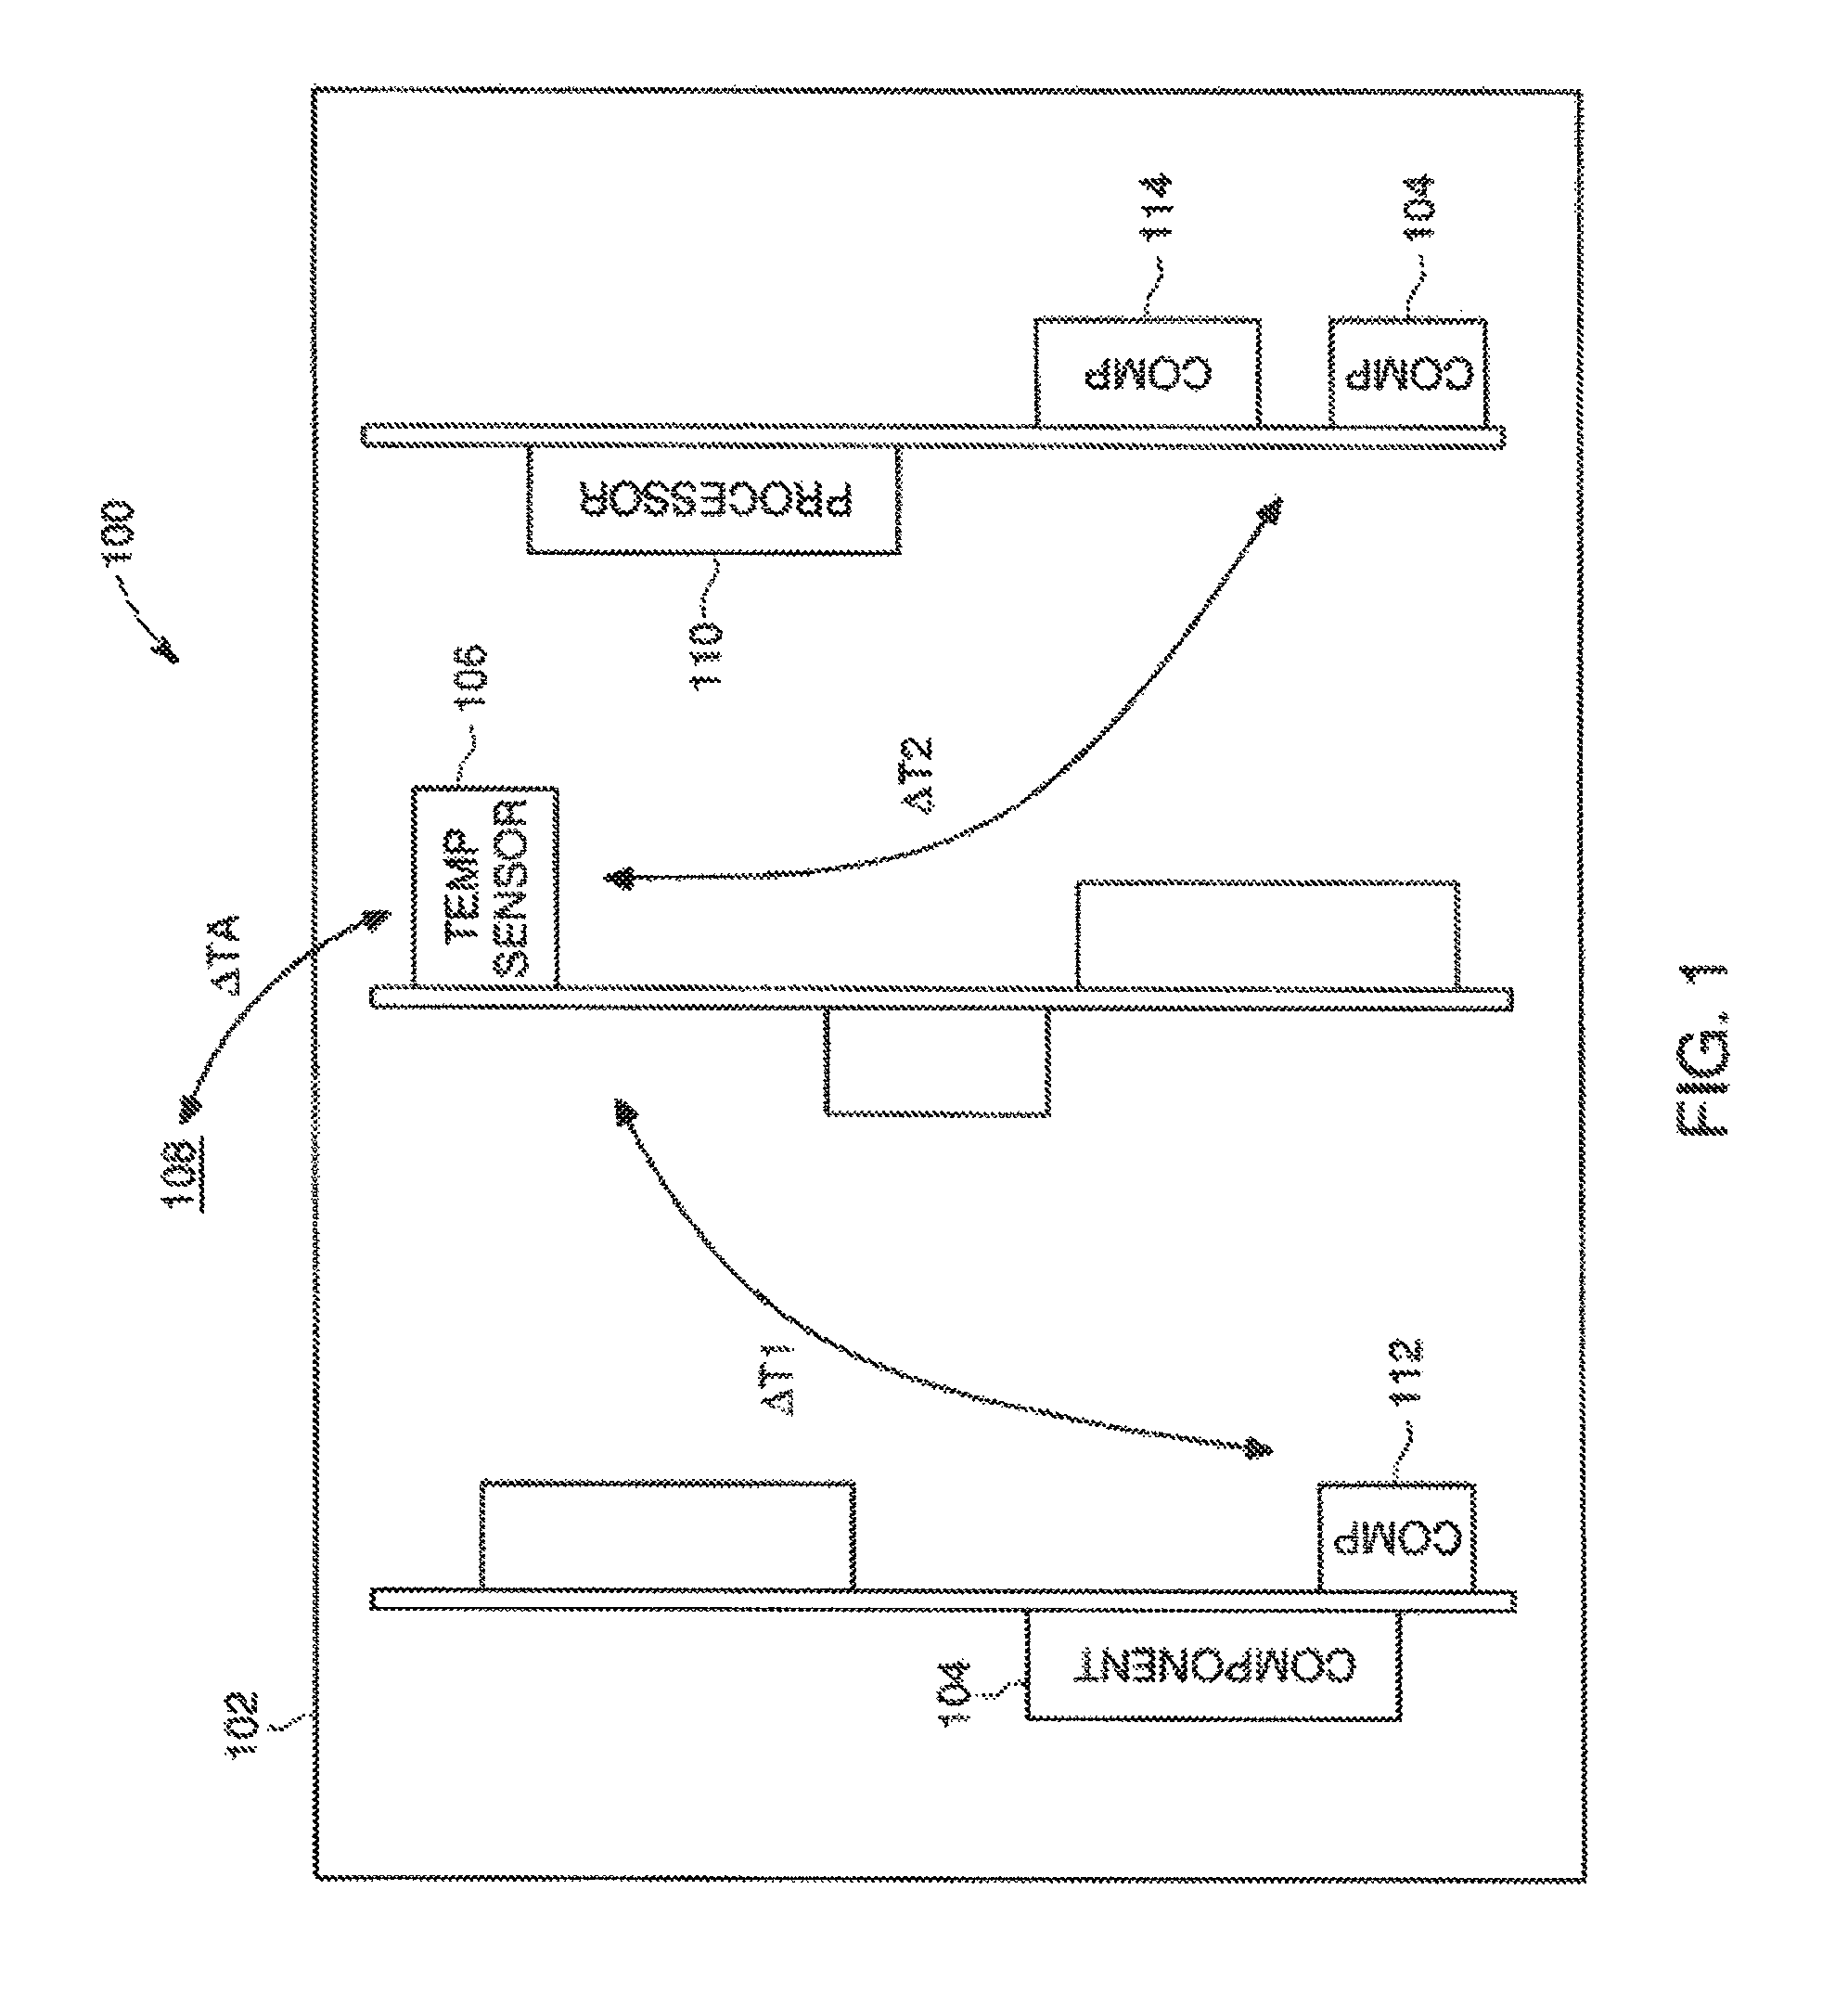 Systems and methods for predicting maintenance of intelligent electronic devices